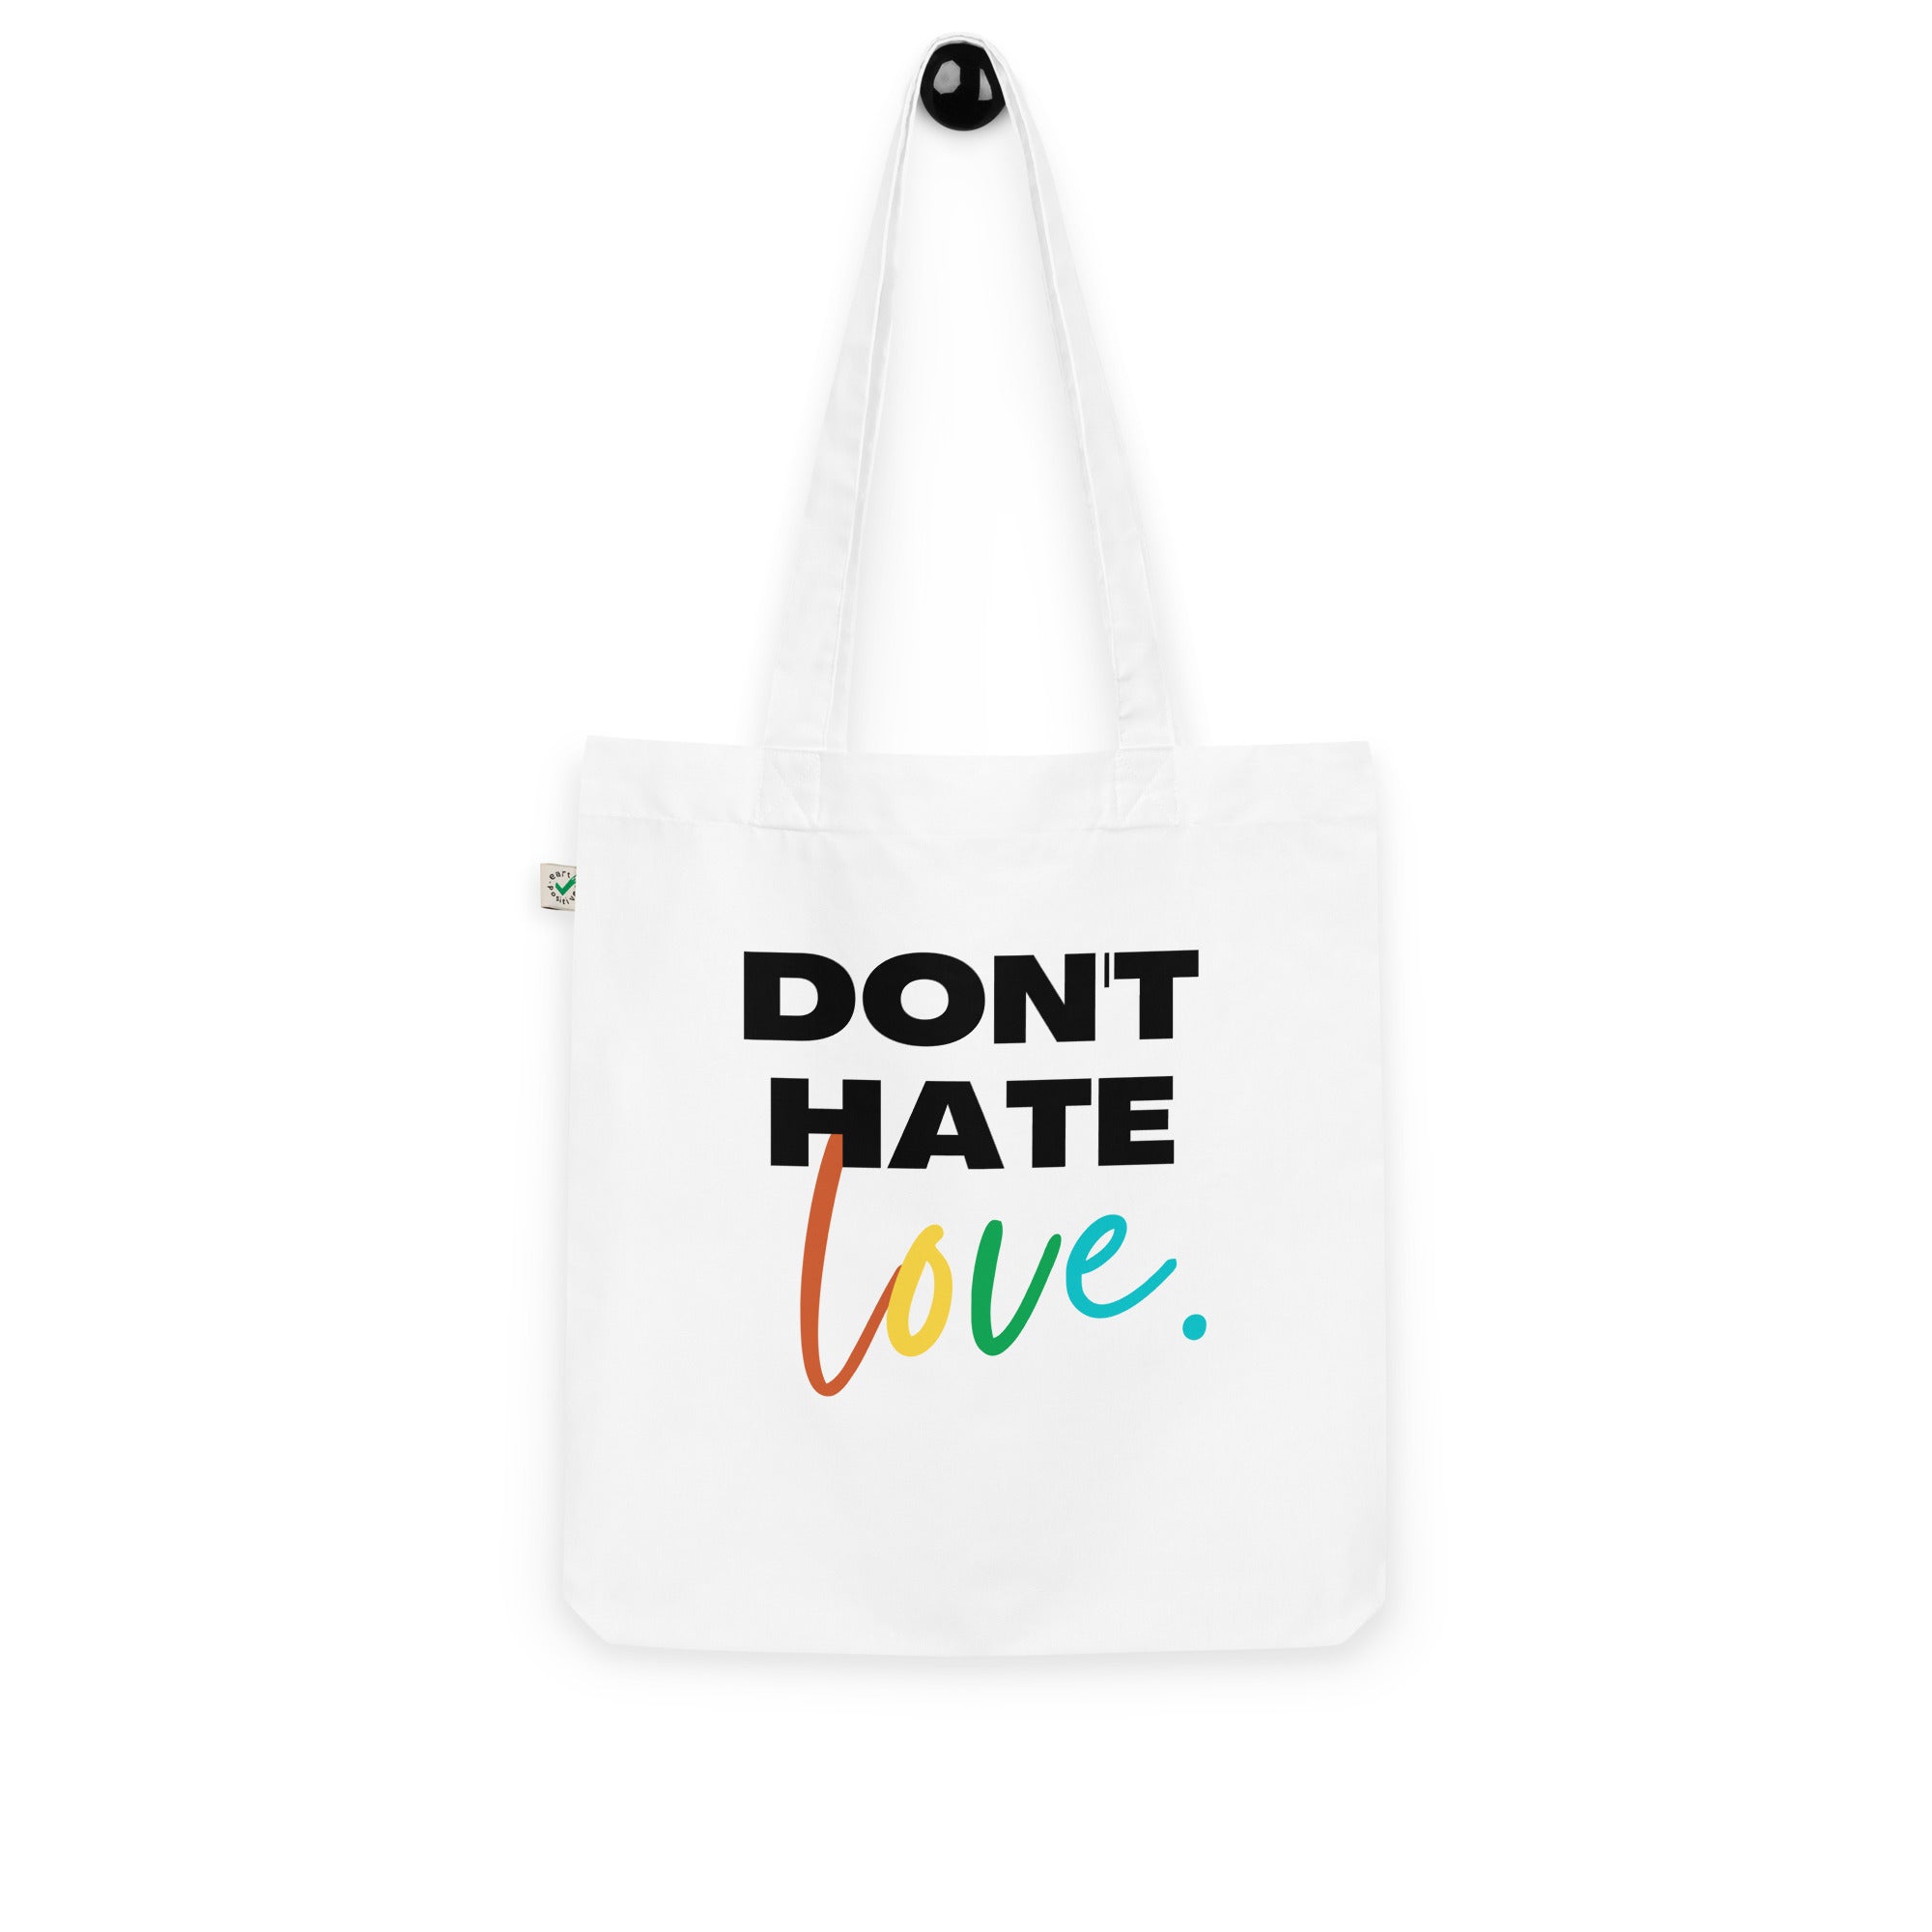 Don't Hate Love Graphic Tote Bag